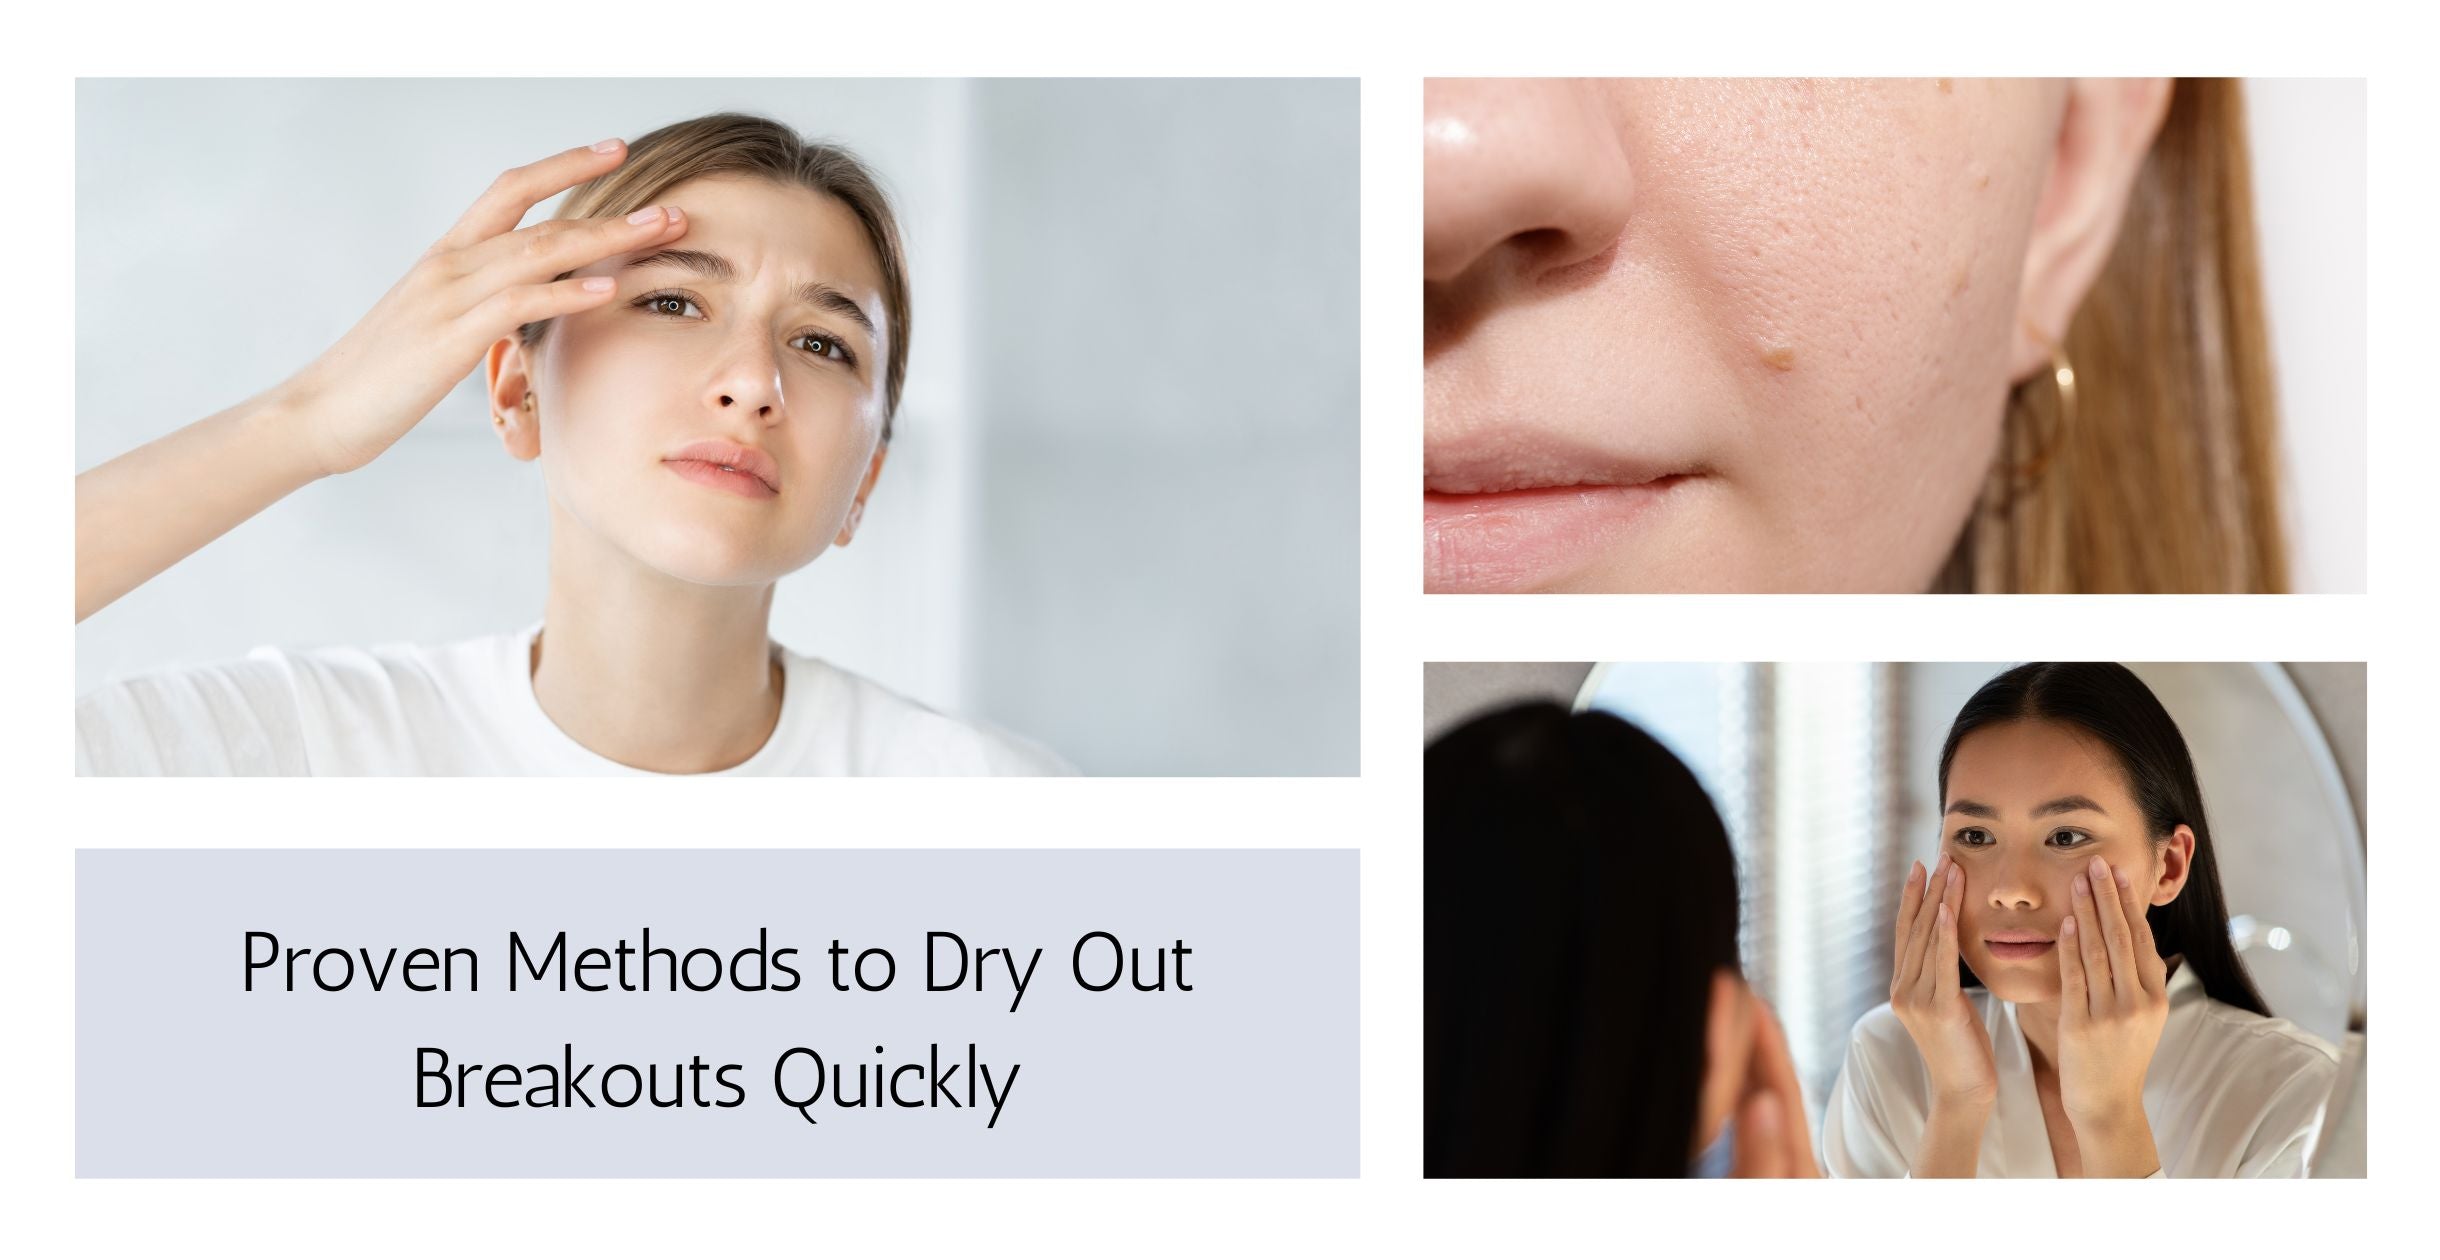 Proven Methods to Dry Out Breakouts Quickly